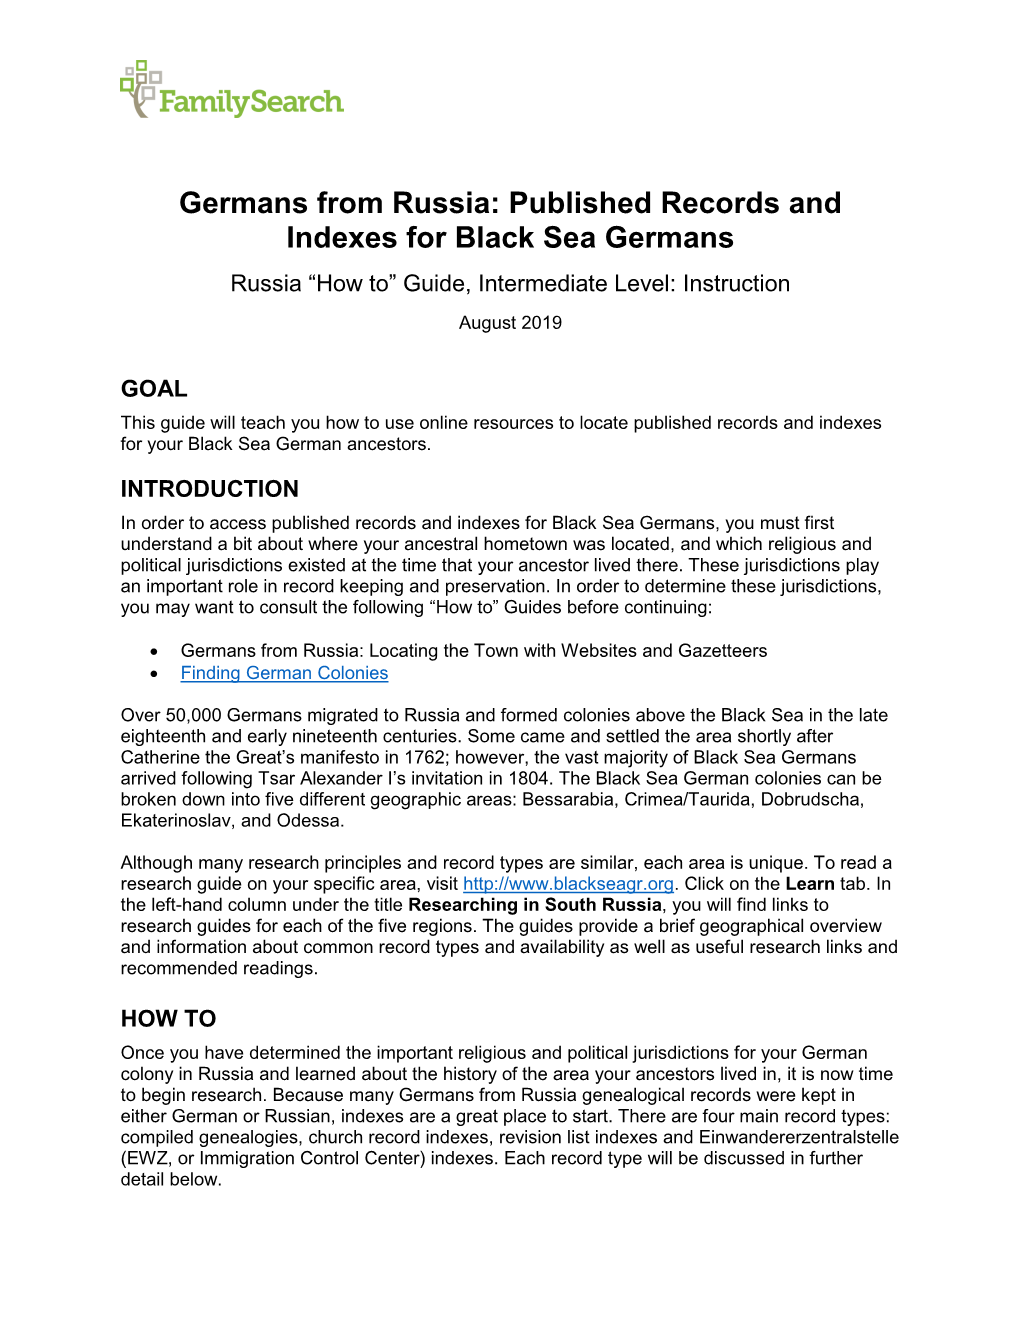 Germans from Russia: Published Records and Indexes for Black Sea Germans